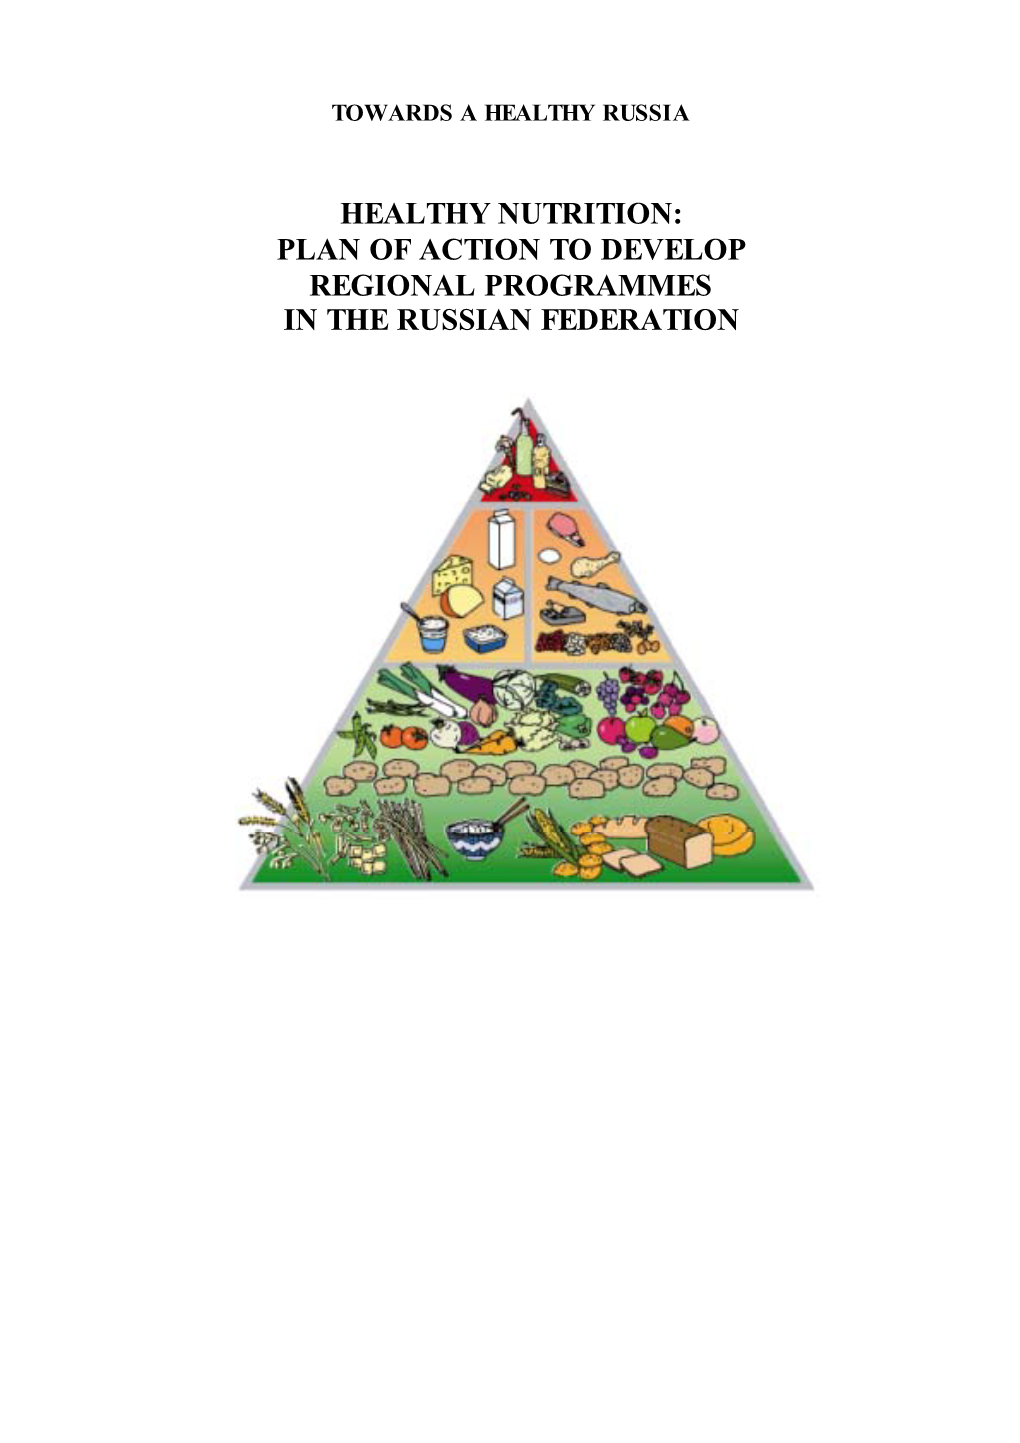 Healthy Nutrition: Plan of Action to Develop Regional Programmes in the Russian Federation